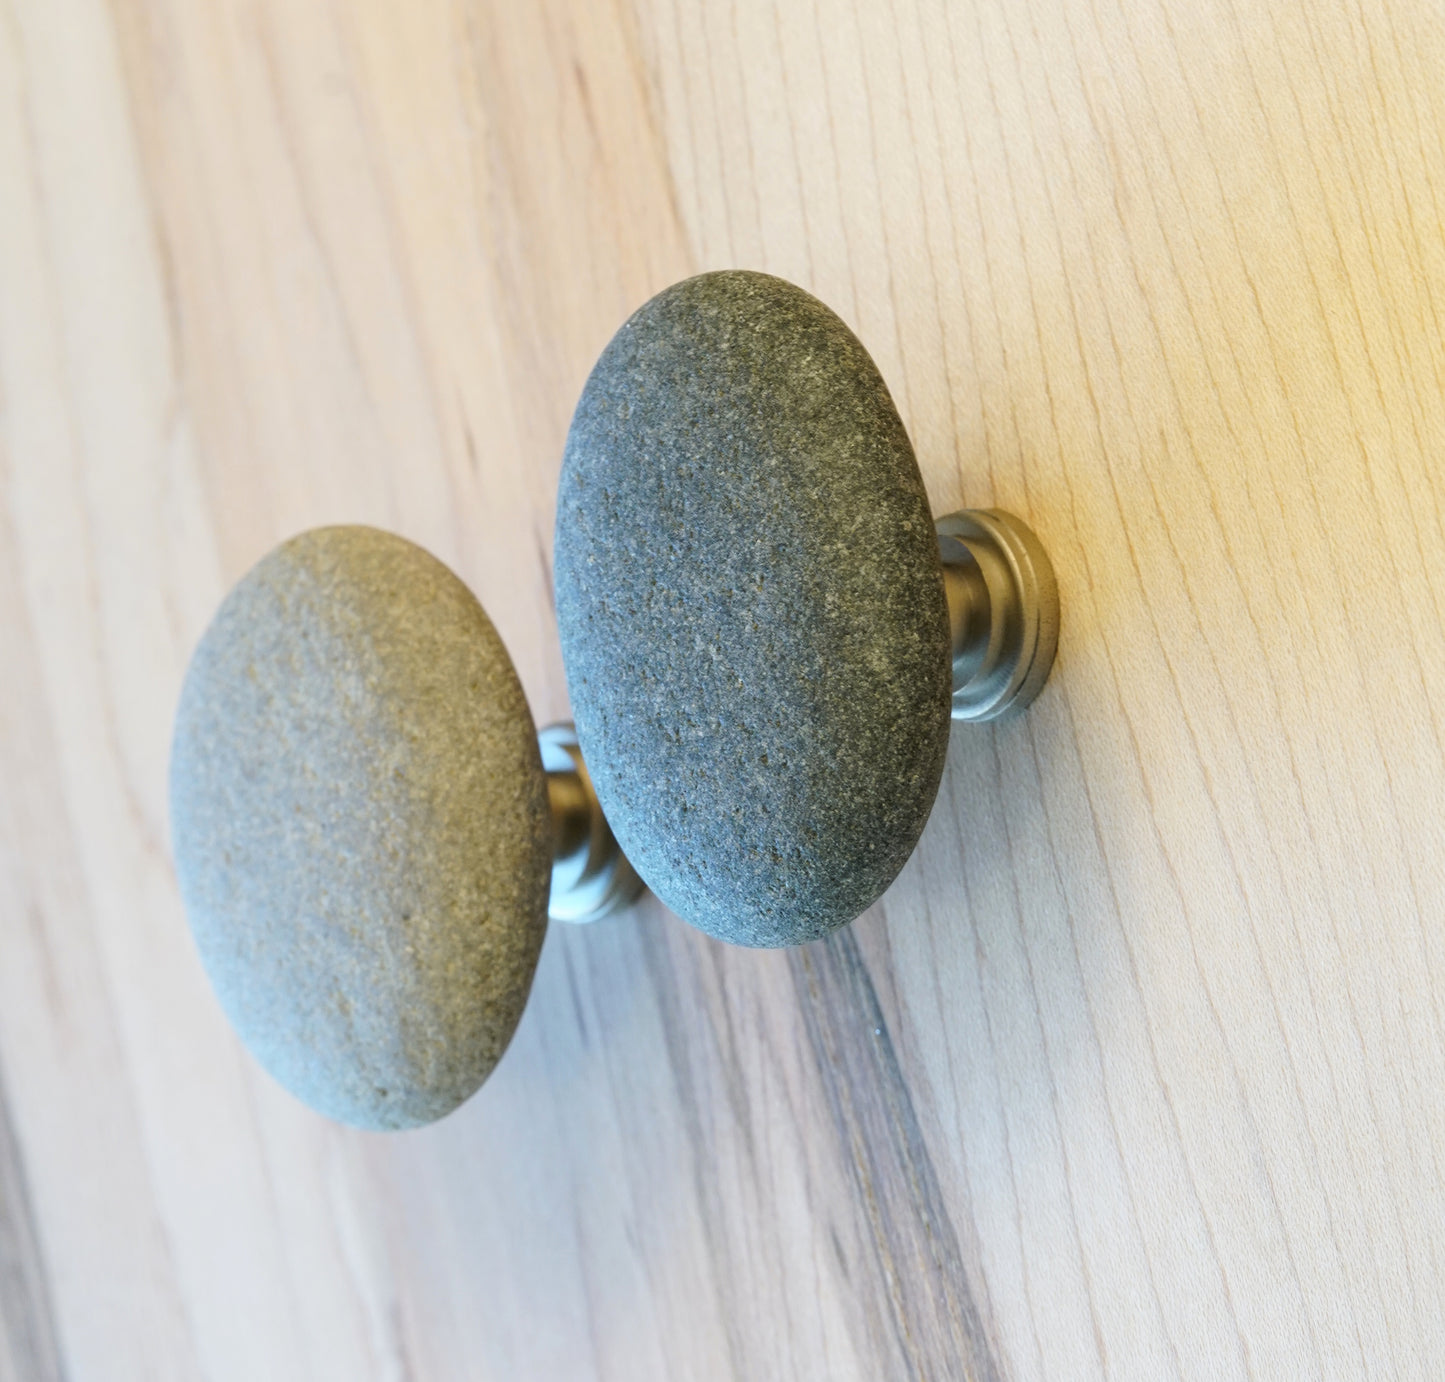 Beach Rock Stone Pebble Cabinet Knobs - Set of 6 - Ready to Ship